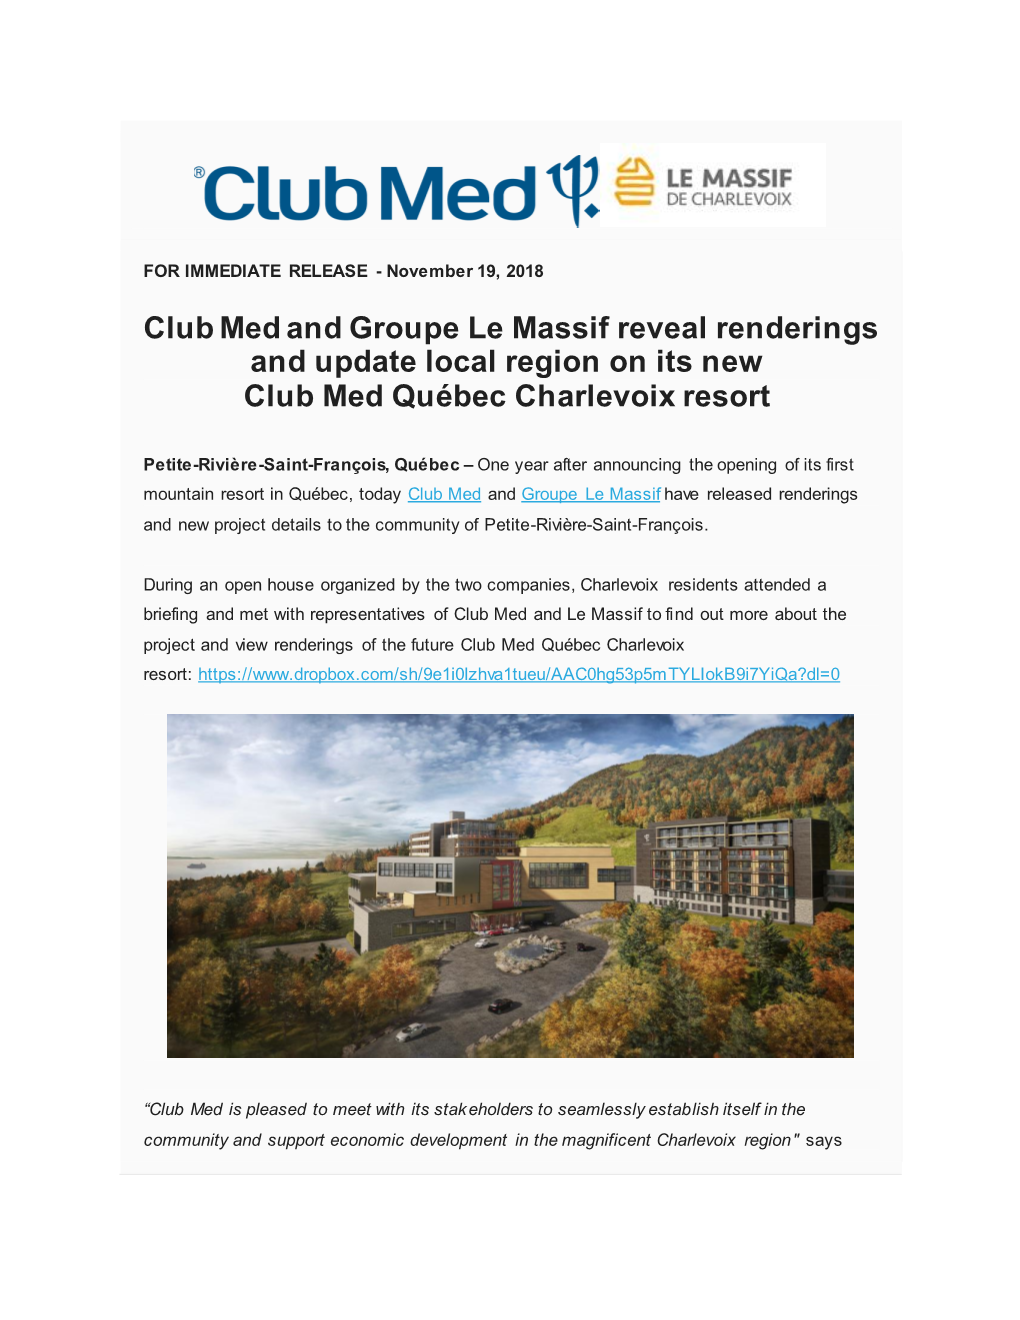 Club Med and Groupe Le Massif Reveal Renderings and Update Local Region on Its New Club Med Québec Charlevoix Resort